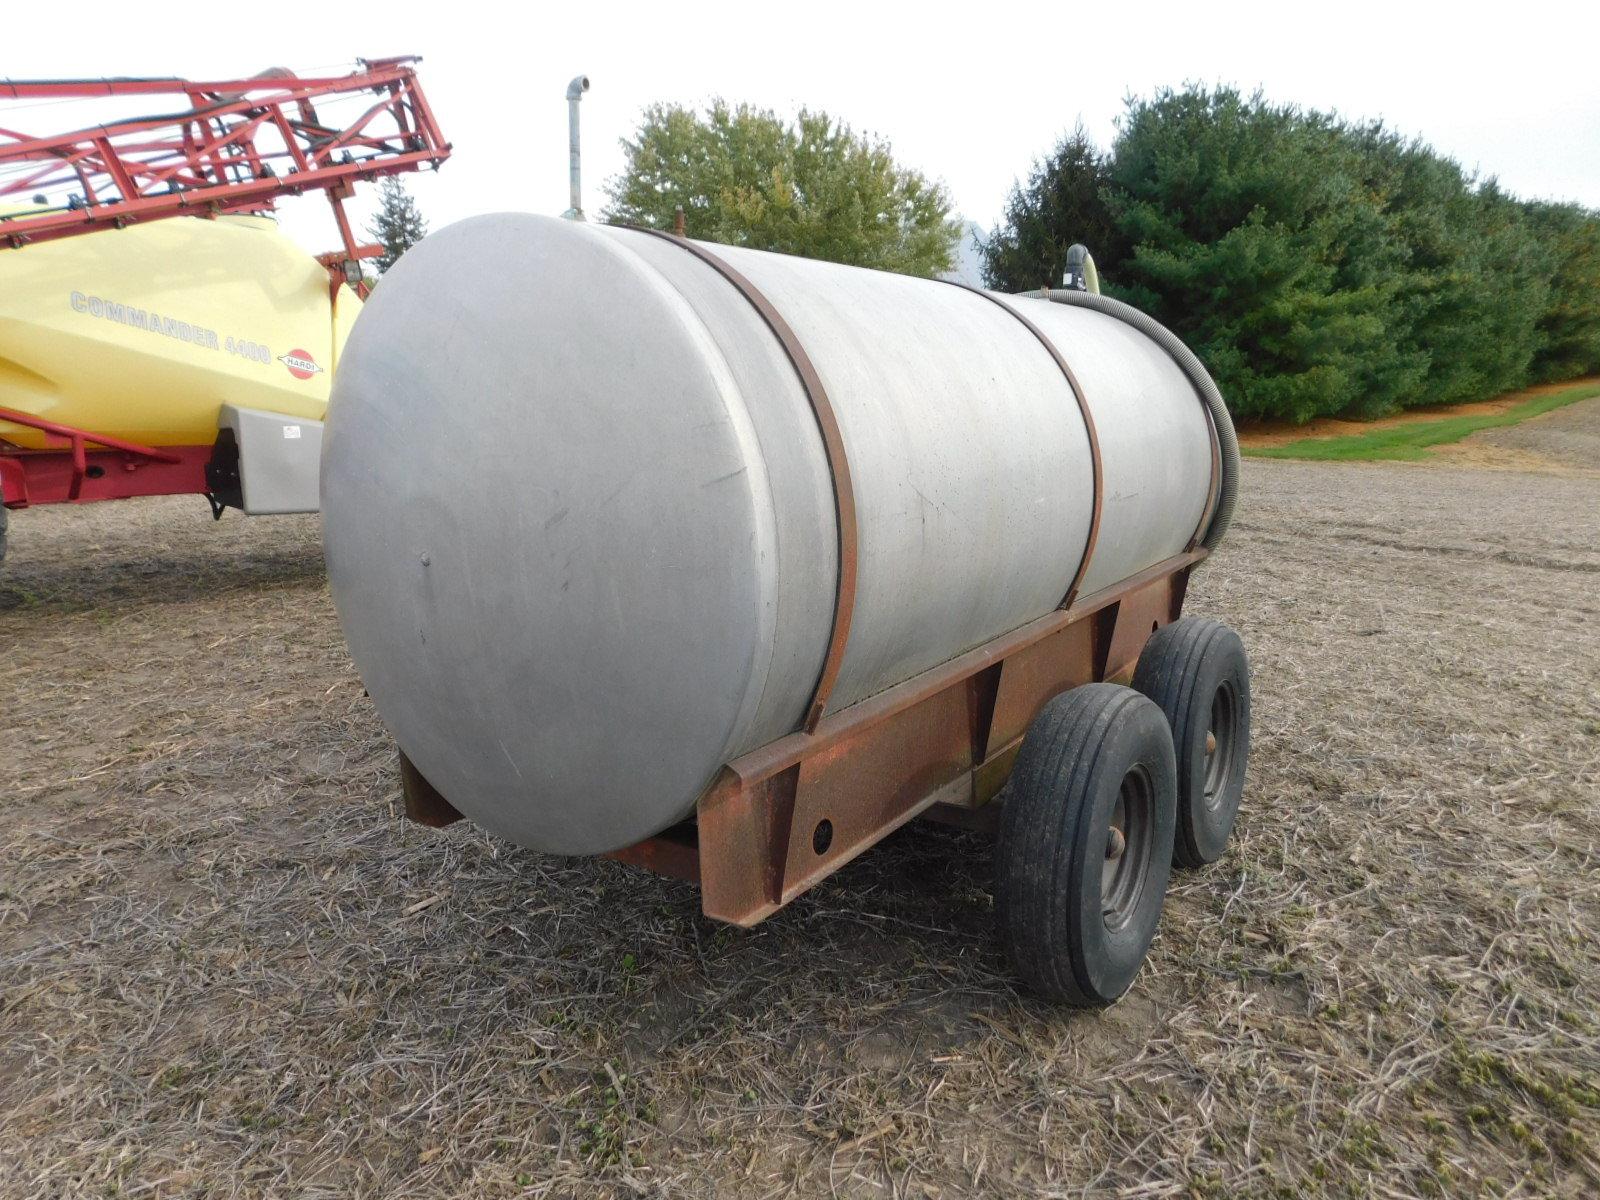 1000 GAL STAINLESS TANK ON TANDEM AXLE TRAILER